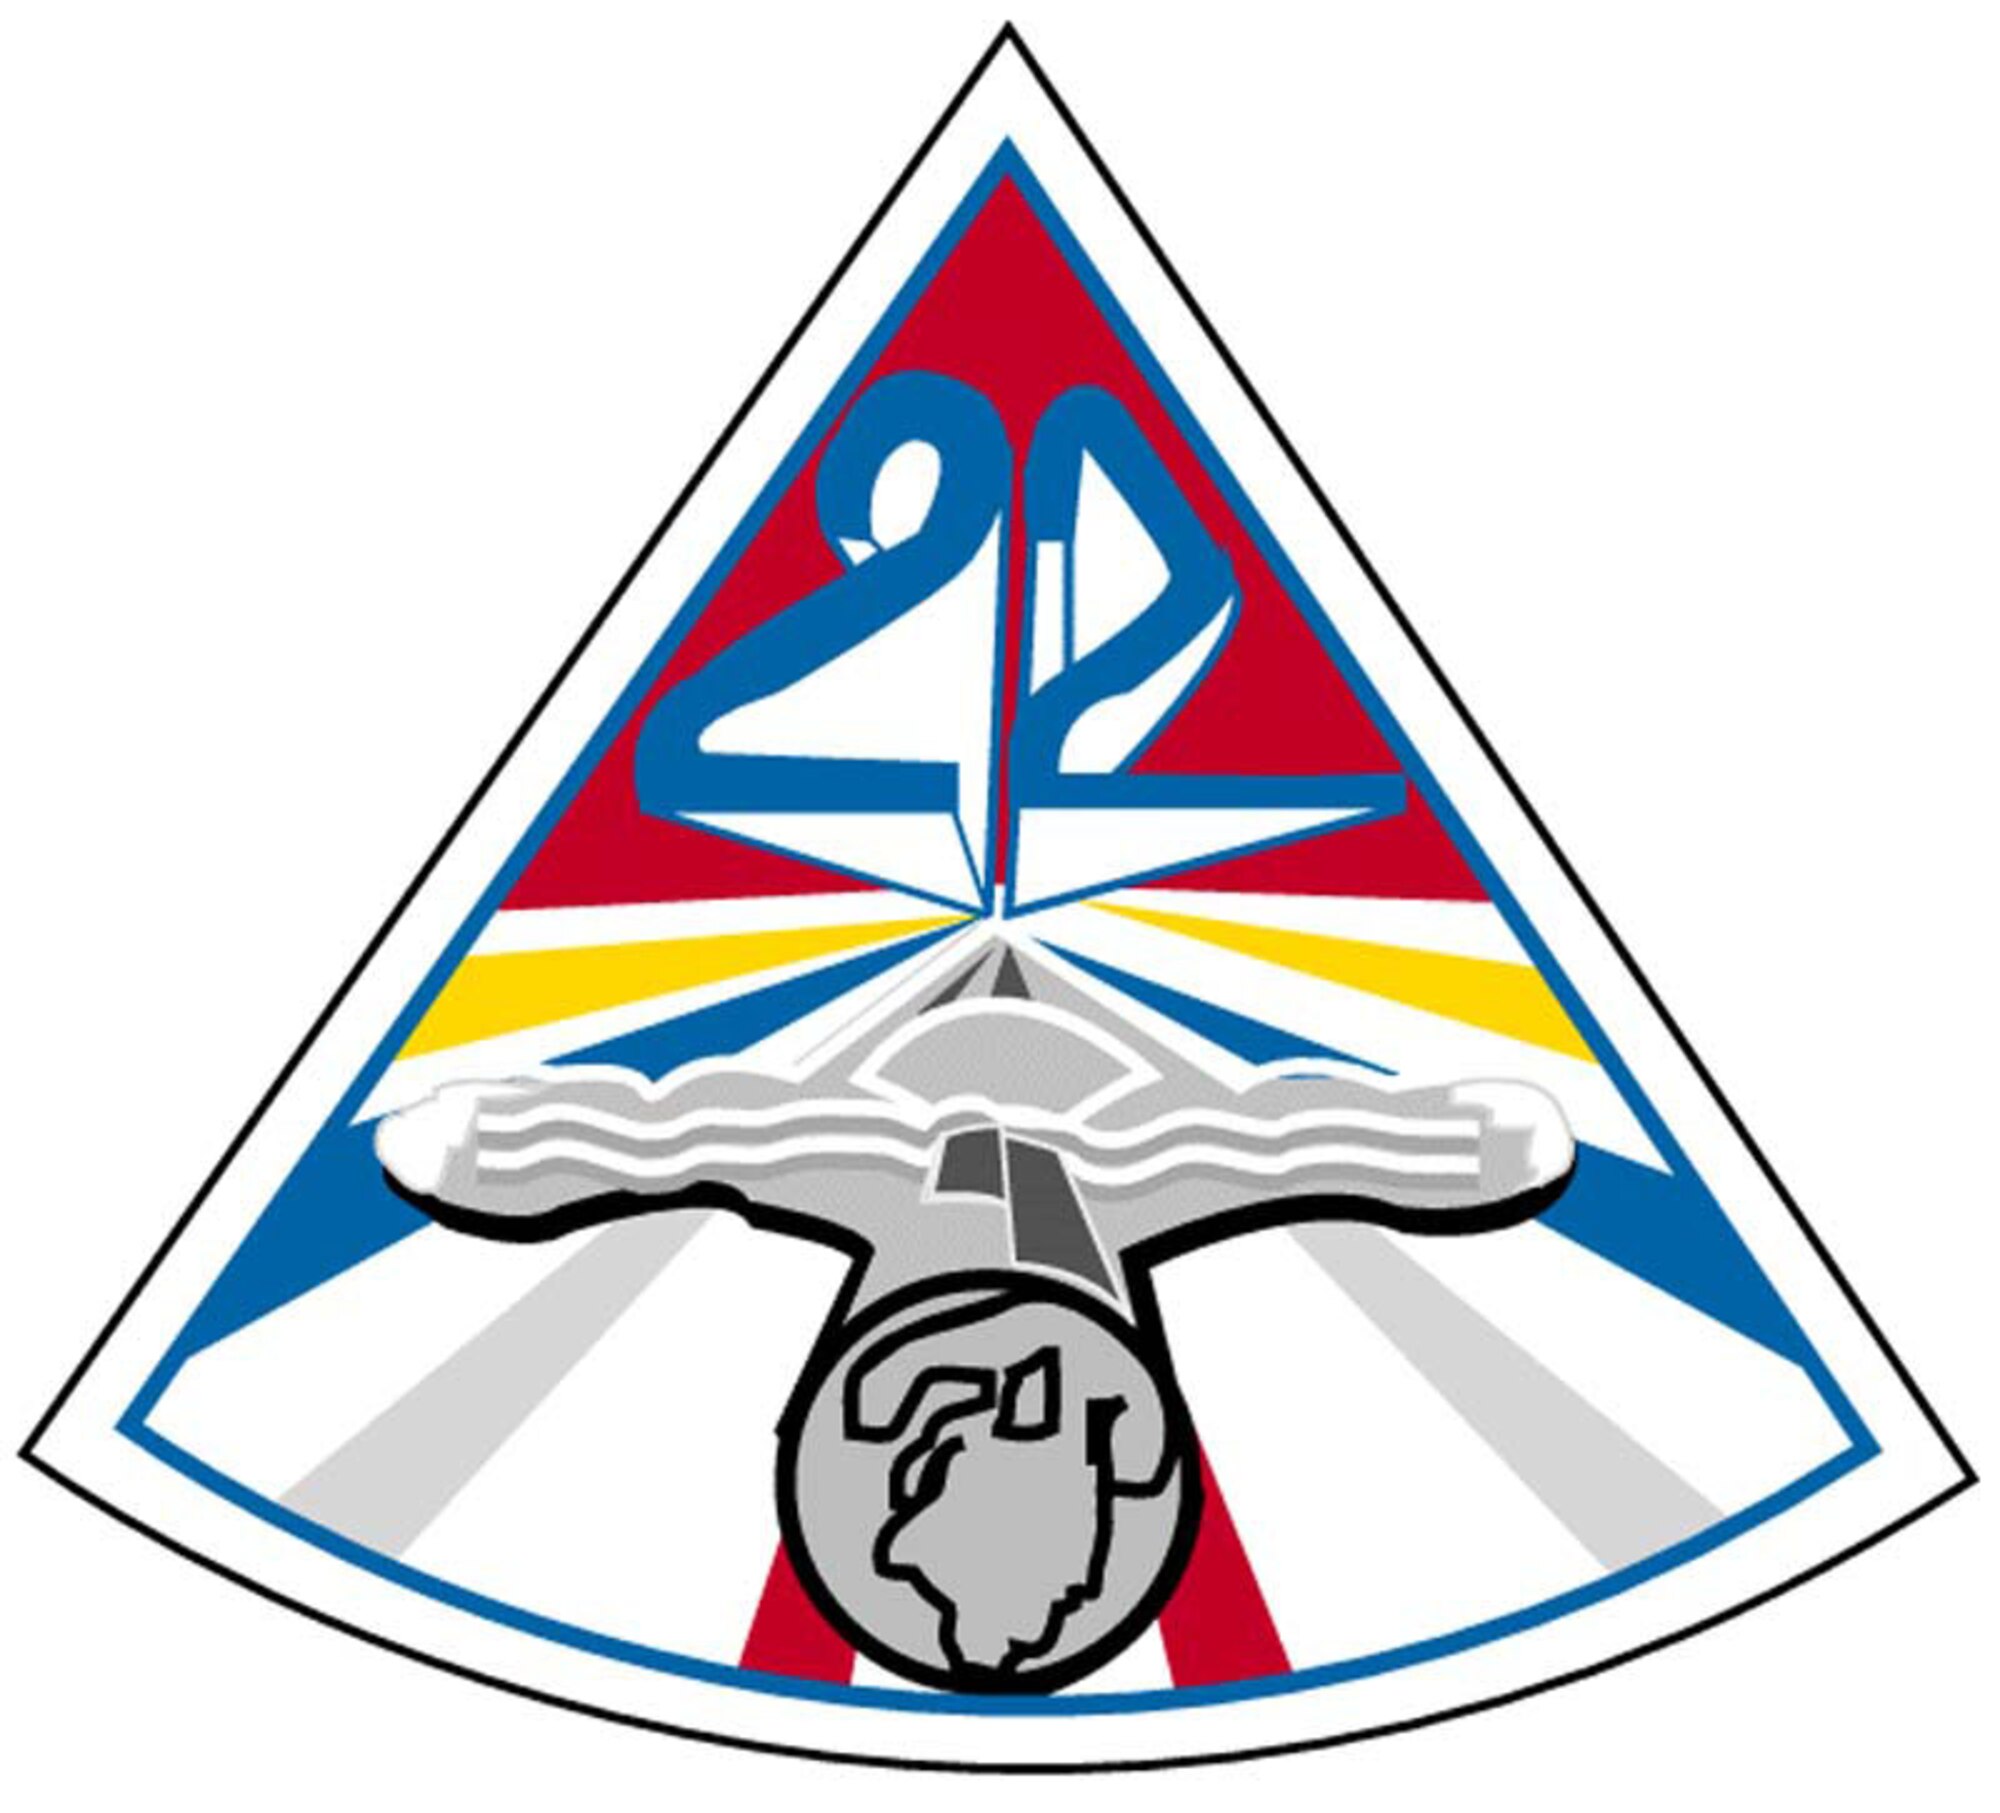 The patch is a triangle with a three-dimensional "22" in the upper part of its red field. A saber with navigator wings on its center and globe on the end of its hilt points toward the center of the field. Eight red, gold, blue and silver rays emanate from the center of the patch.

The emblem's triangle shape compares the squadron's strength and solidarity to one of the sturdiest geometrical shapes--the triangle. The dominate red color symbolizes courage. The saber, with the navigator's badge and globe, represents strength and readiness. The colored light rays, converging to a point on the horizon, signify unity among the four classes of the cadet wing.

This is the squadron's original patch.